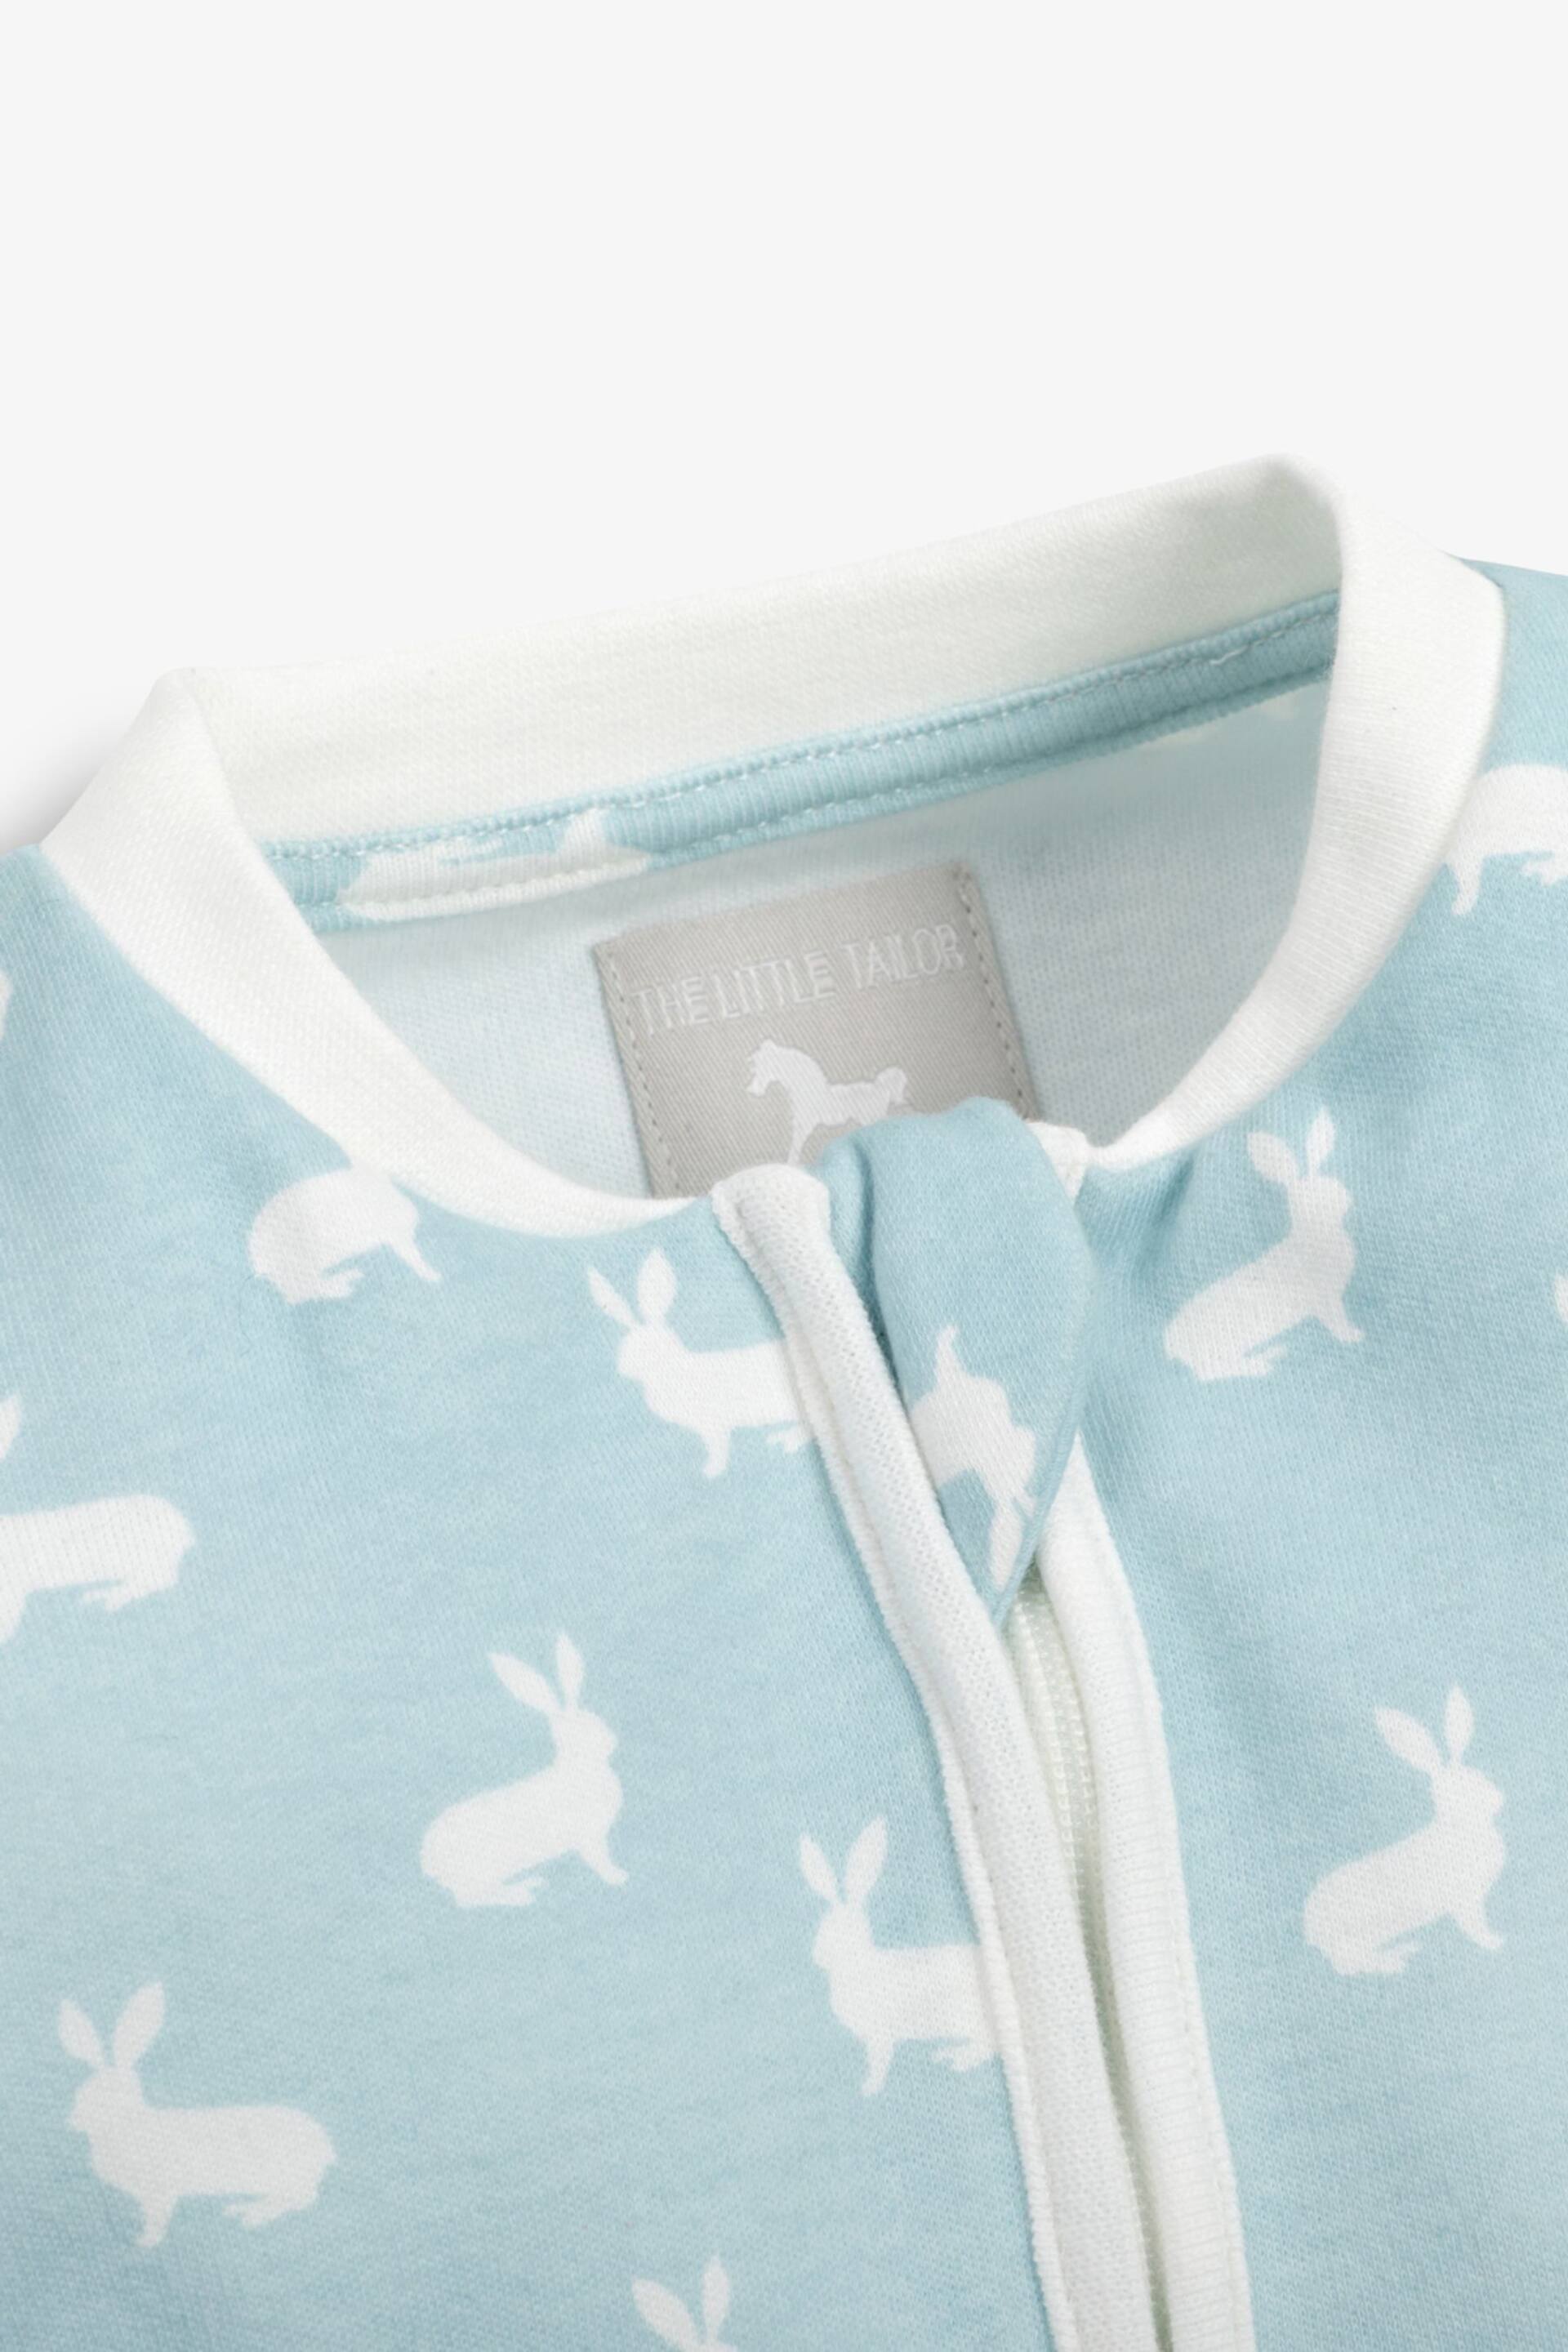 The Little Tailor Baby Front Zip Easter Bunny Print Soft Cotton Sleepsuit - Image 3 of 4